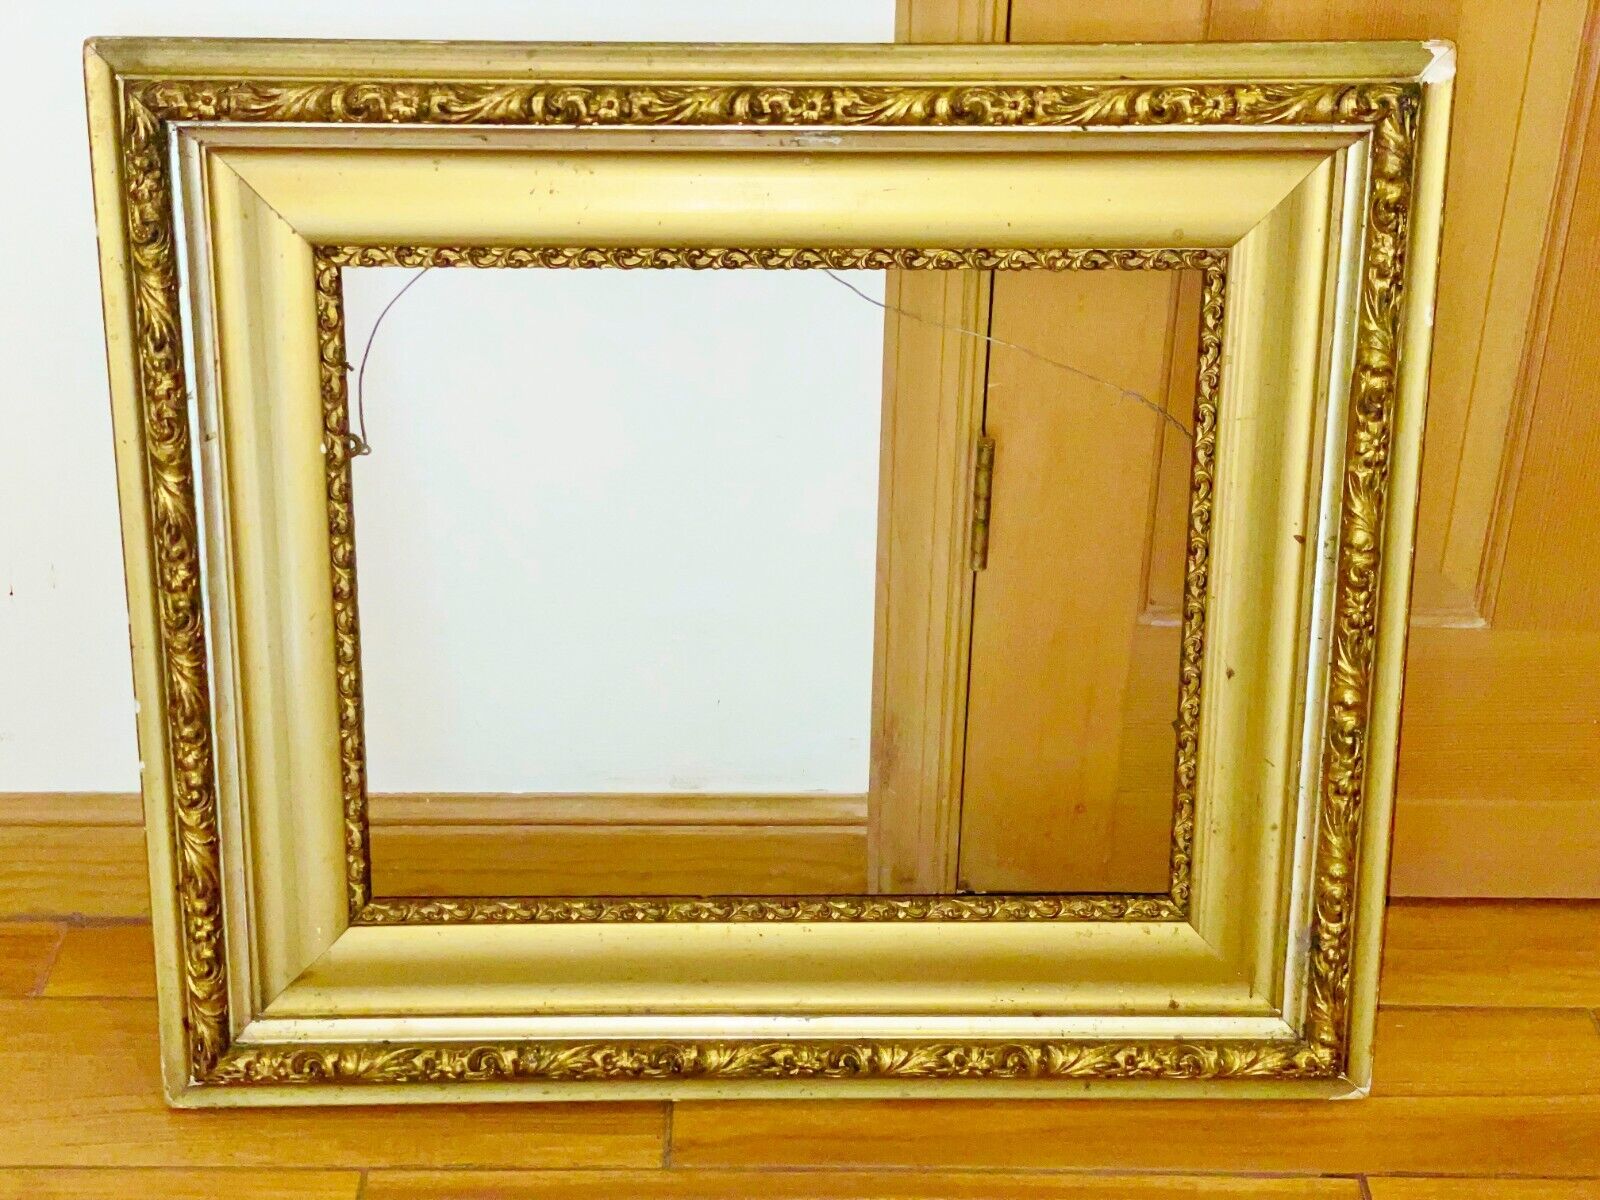 ANTIQUE GOLD GILT ORNATE AESTHETIC MOVEMENT VICTORIAN PICTURE FRAME, FIT 16”x20”